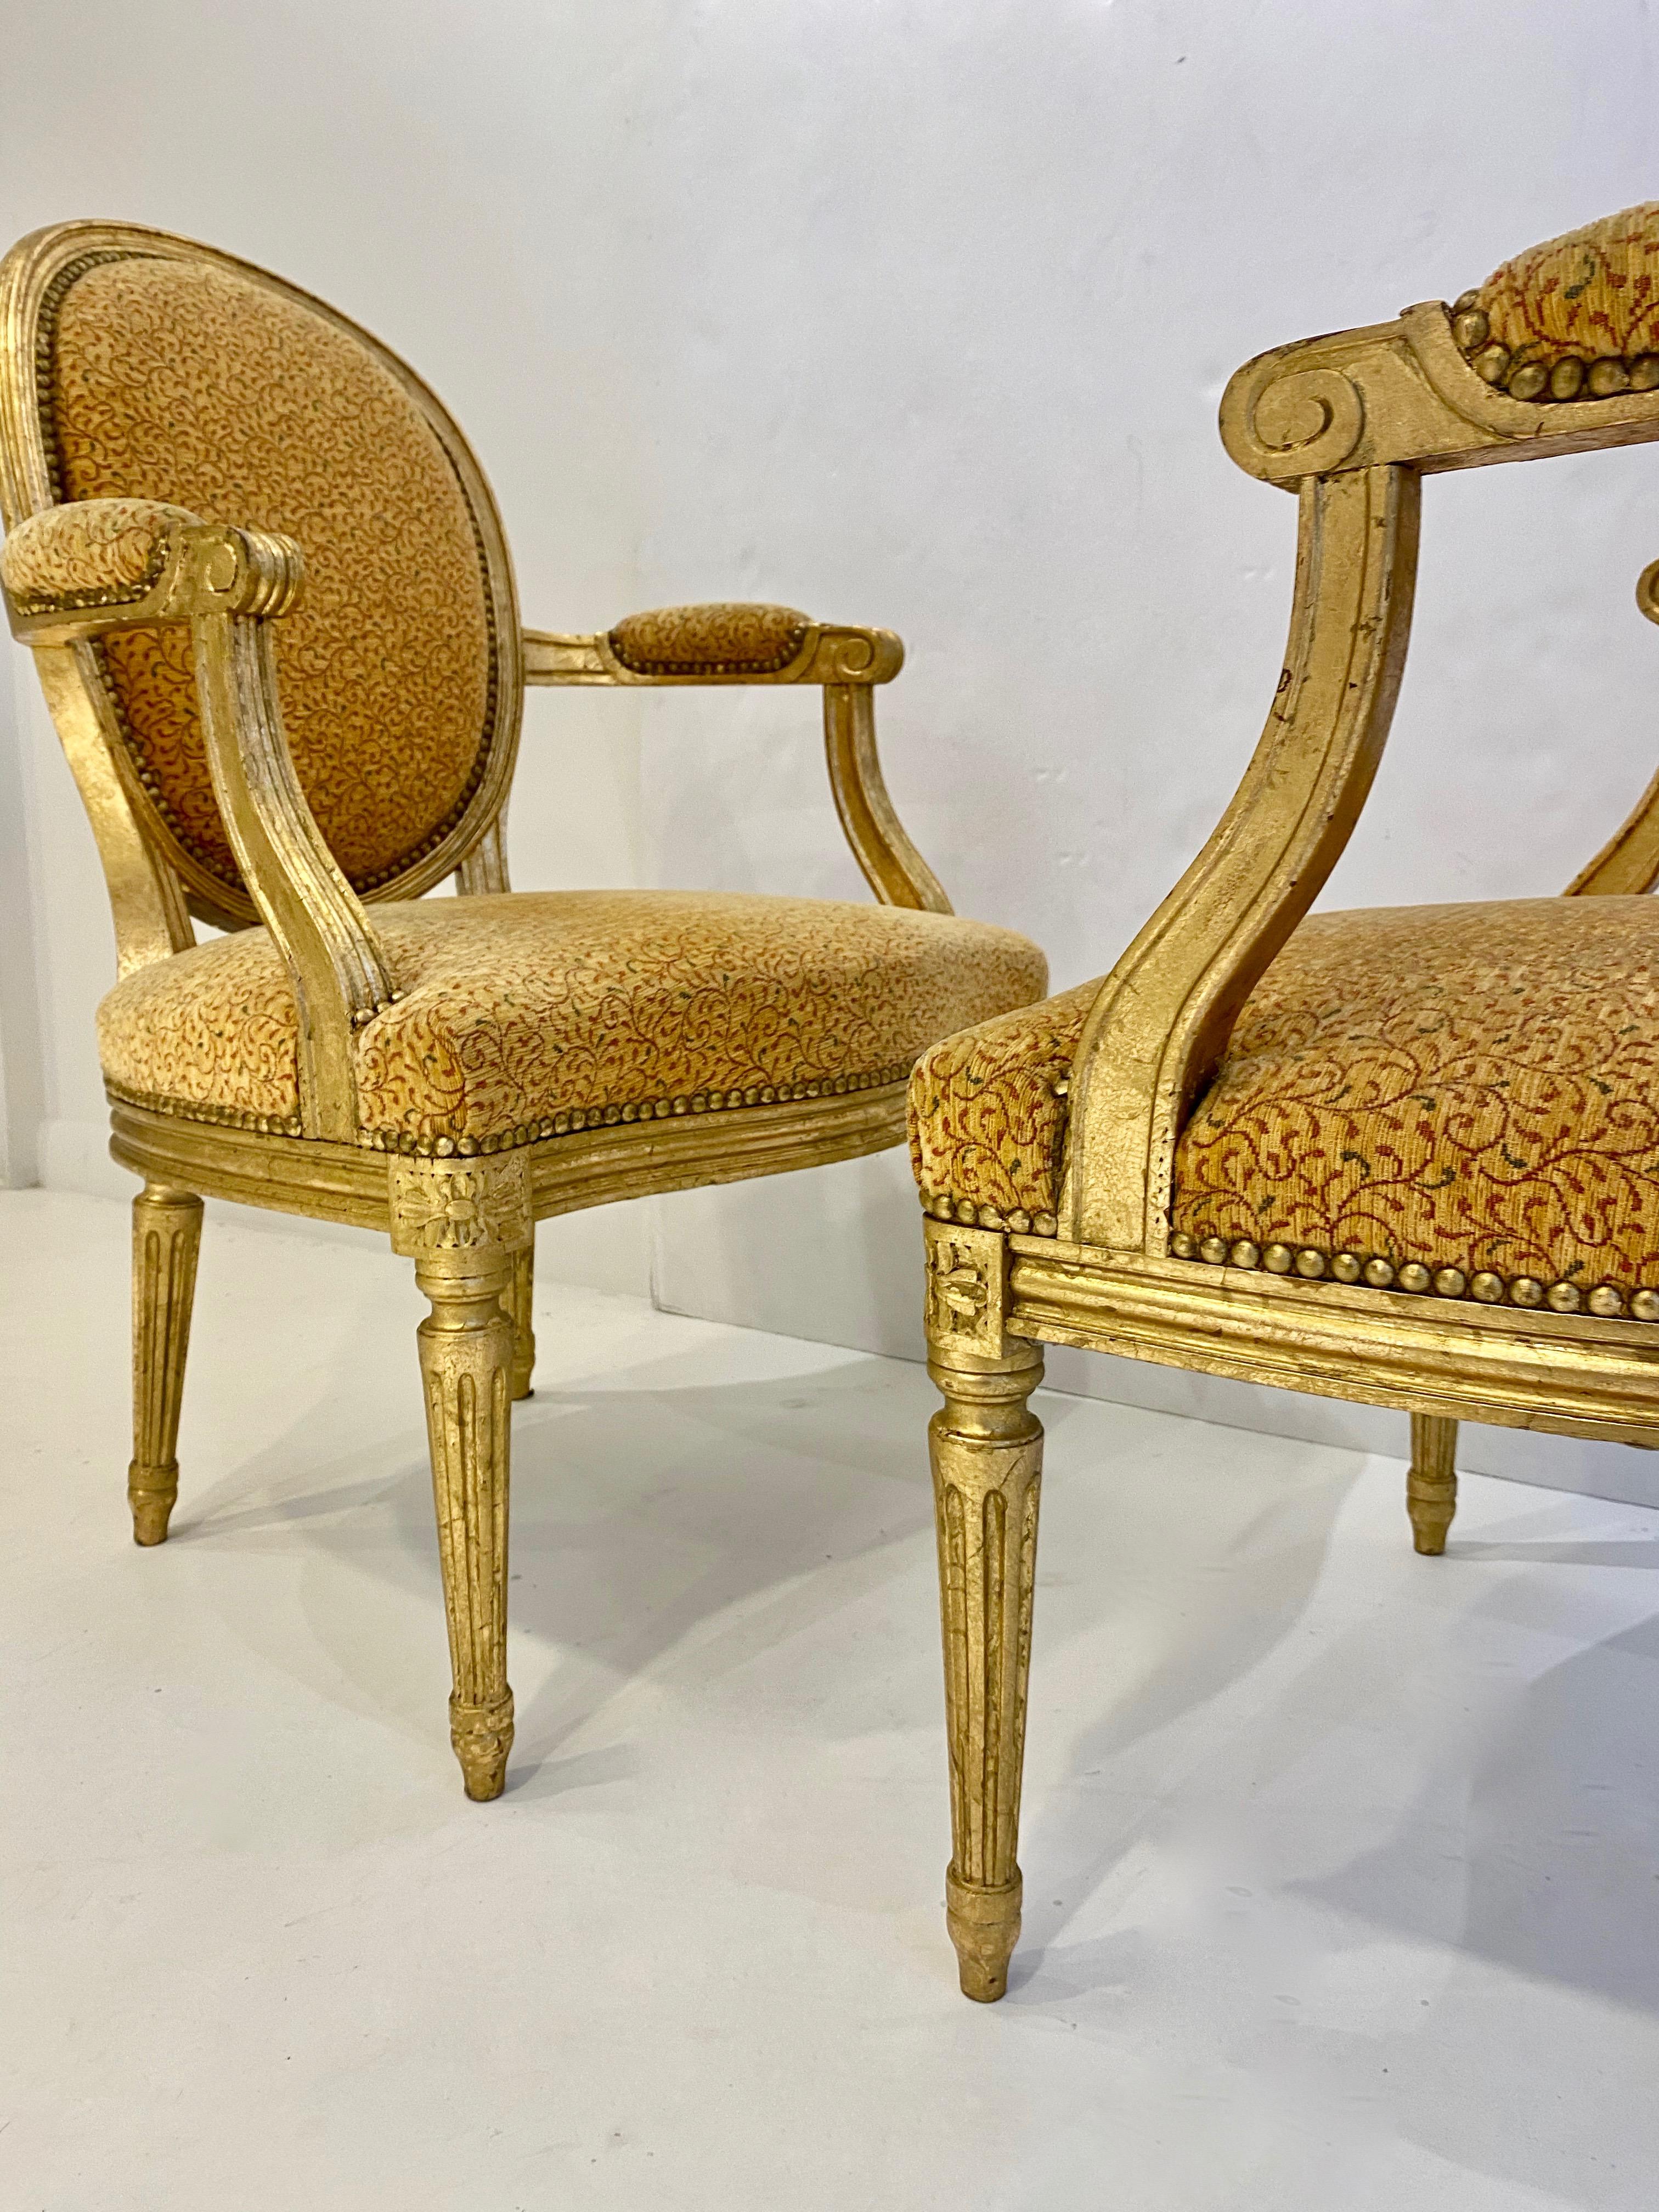 A beautiful pair of Louis XV style giltwood armchairs with fluted tapered legs and a nailhead detail. These chairs are covered in a pattered chenille fabric with rounded backs.